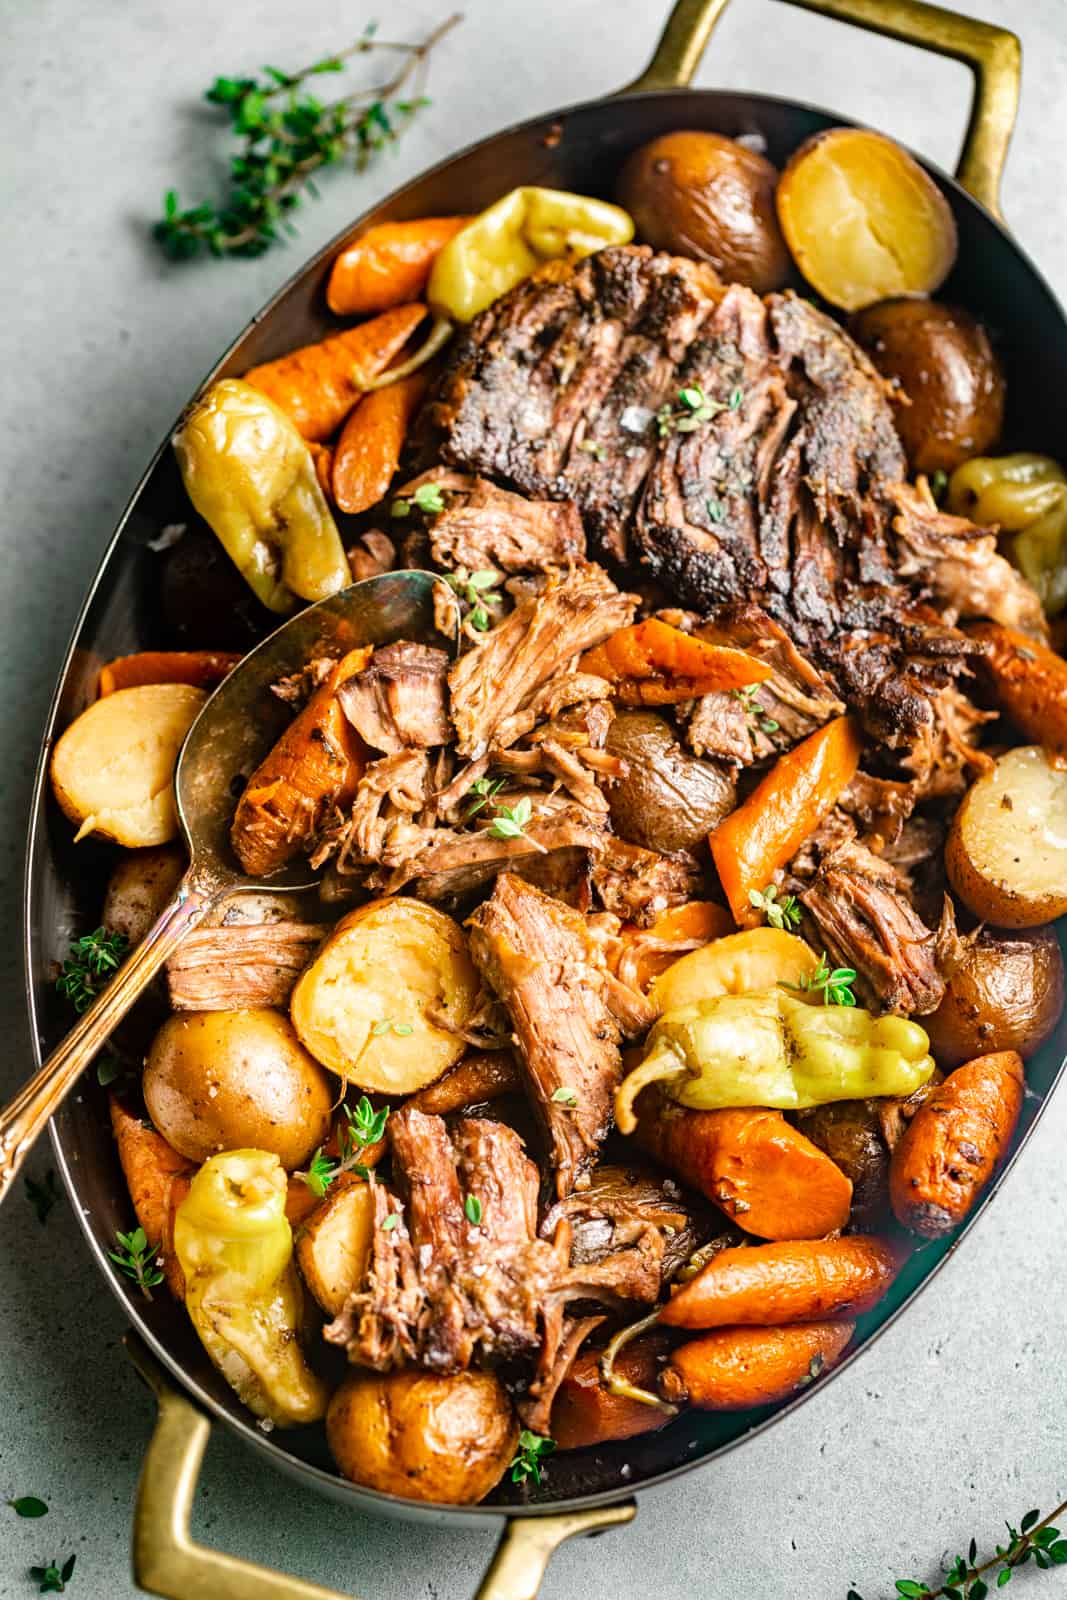 mississippi pot roast in a serving dish with a spoon and garnished with fresh thyme and pepperoncini peppers.